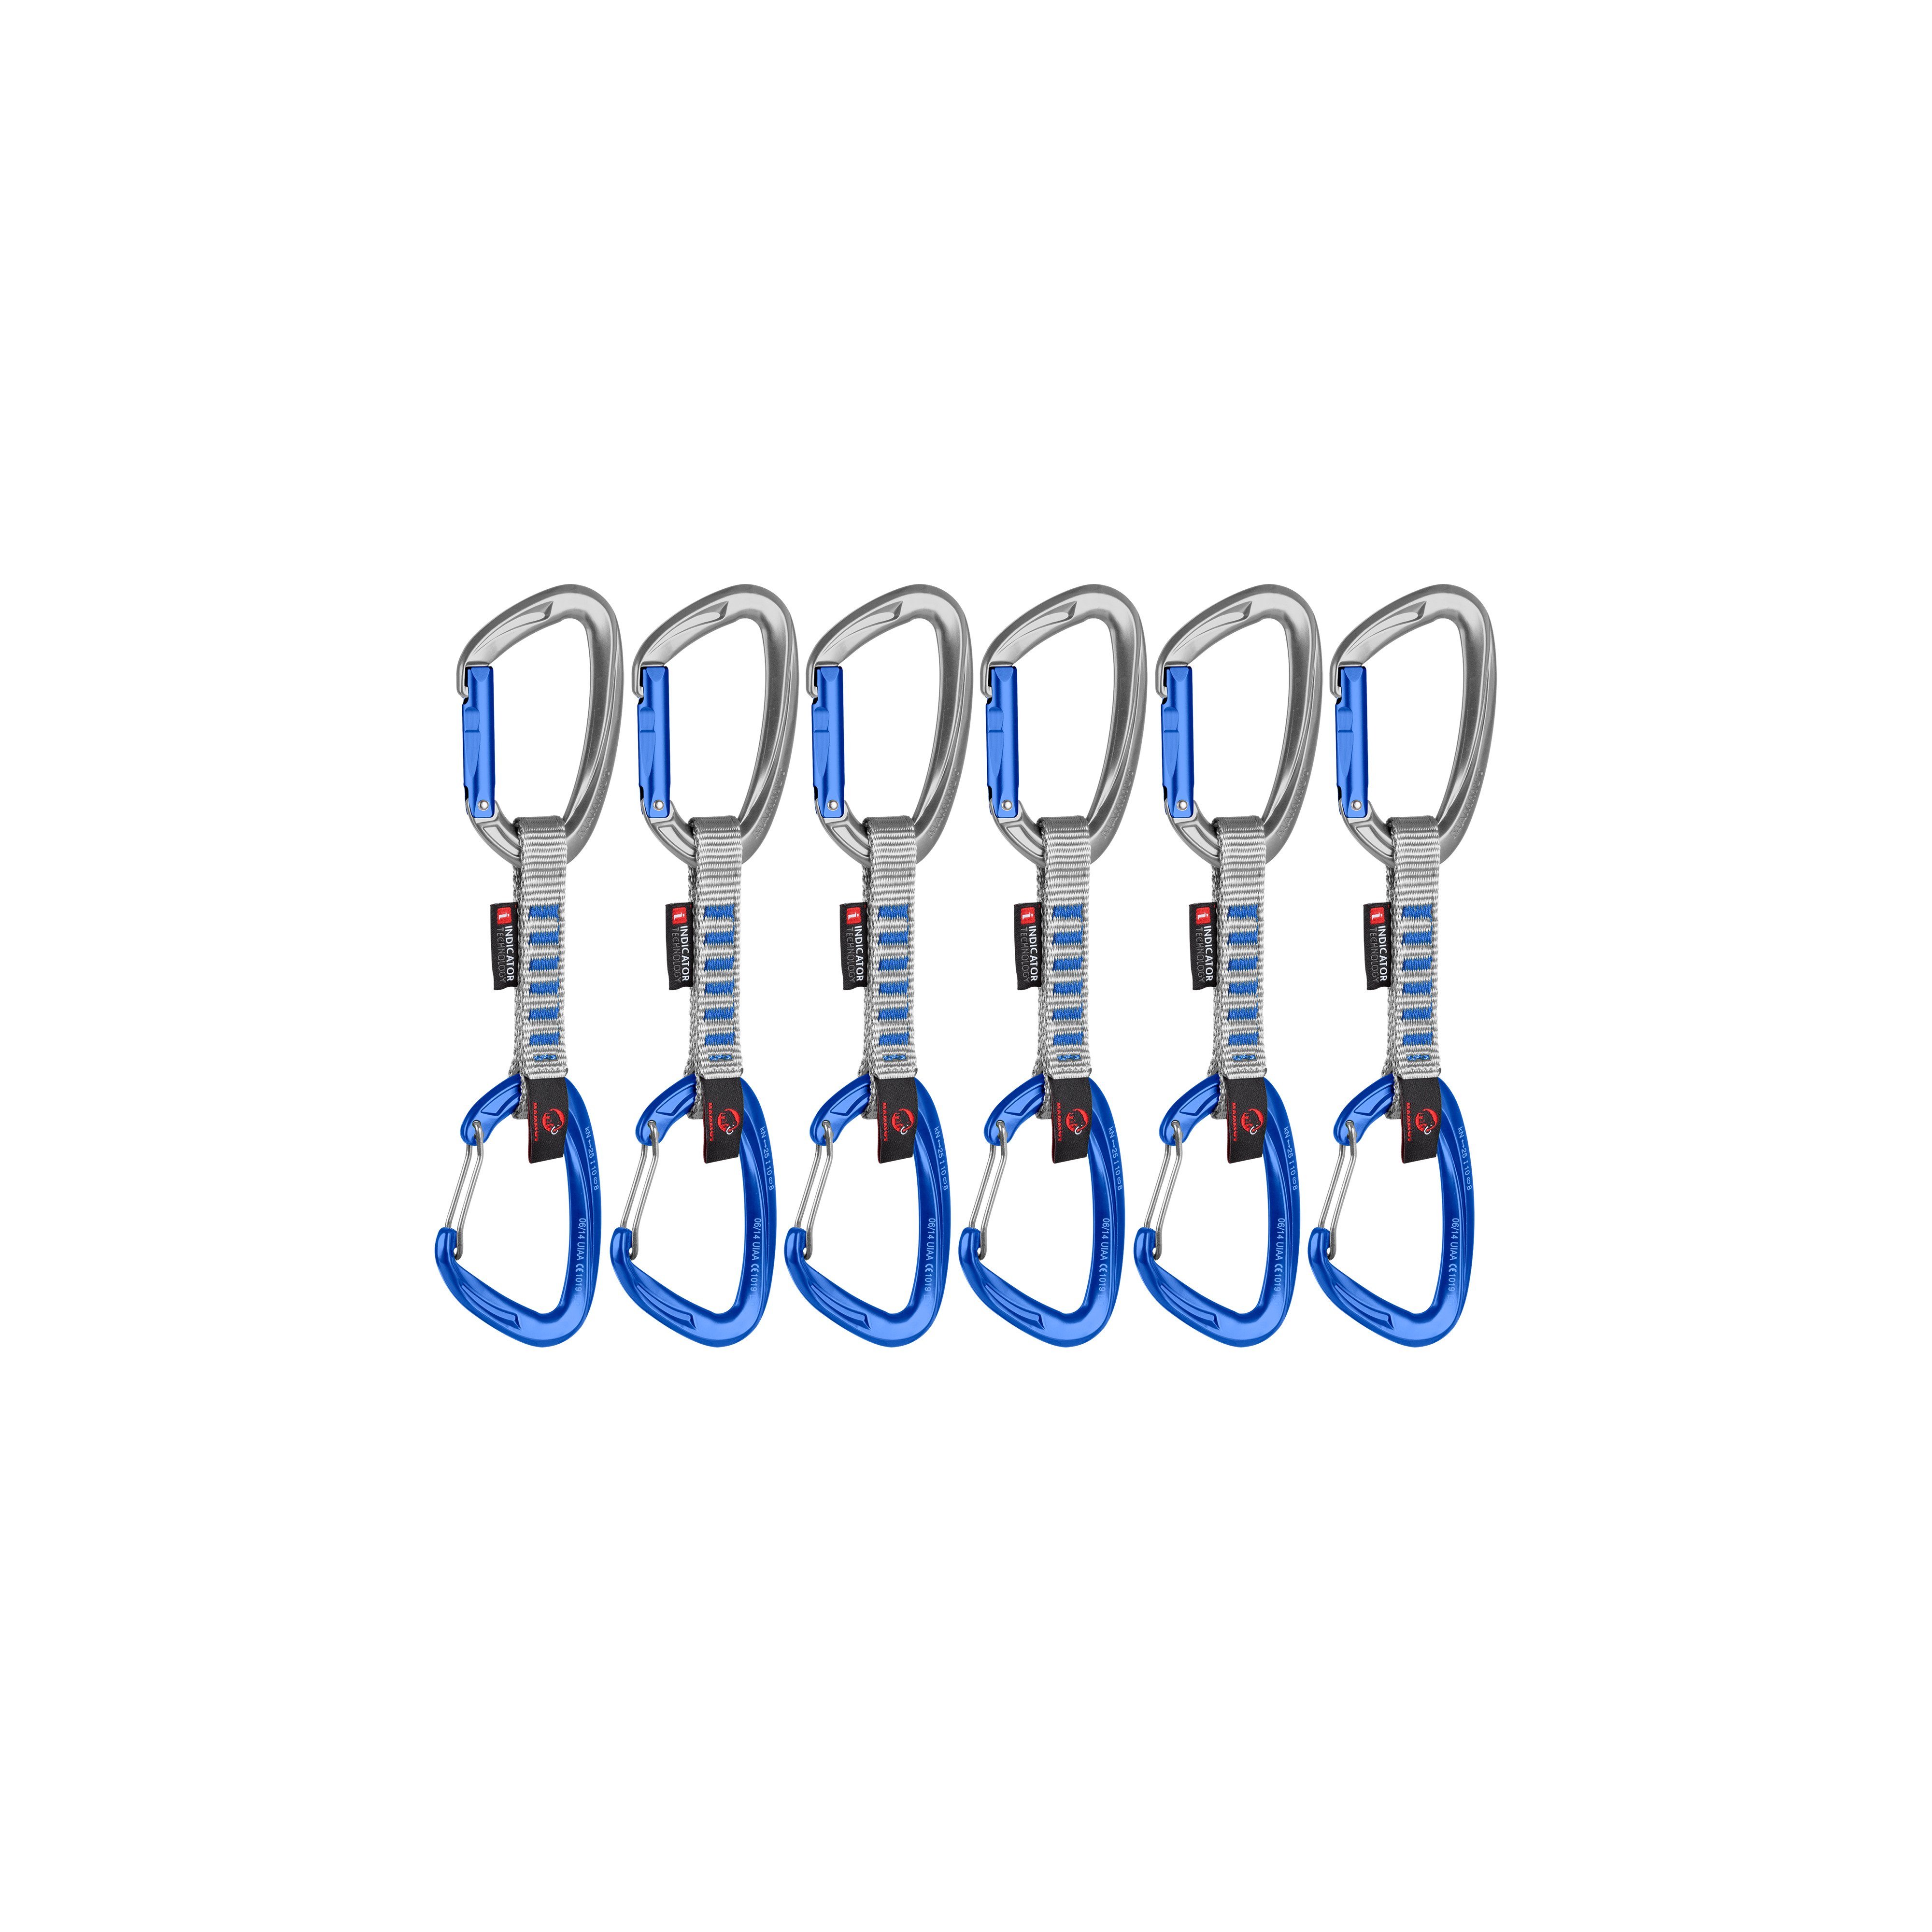 Crag Keylock Wire 10 cm Indicator 6-Pack Quickdraws - silver-ultramarine, 10 cm product image